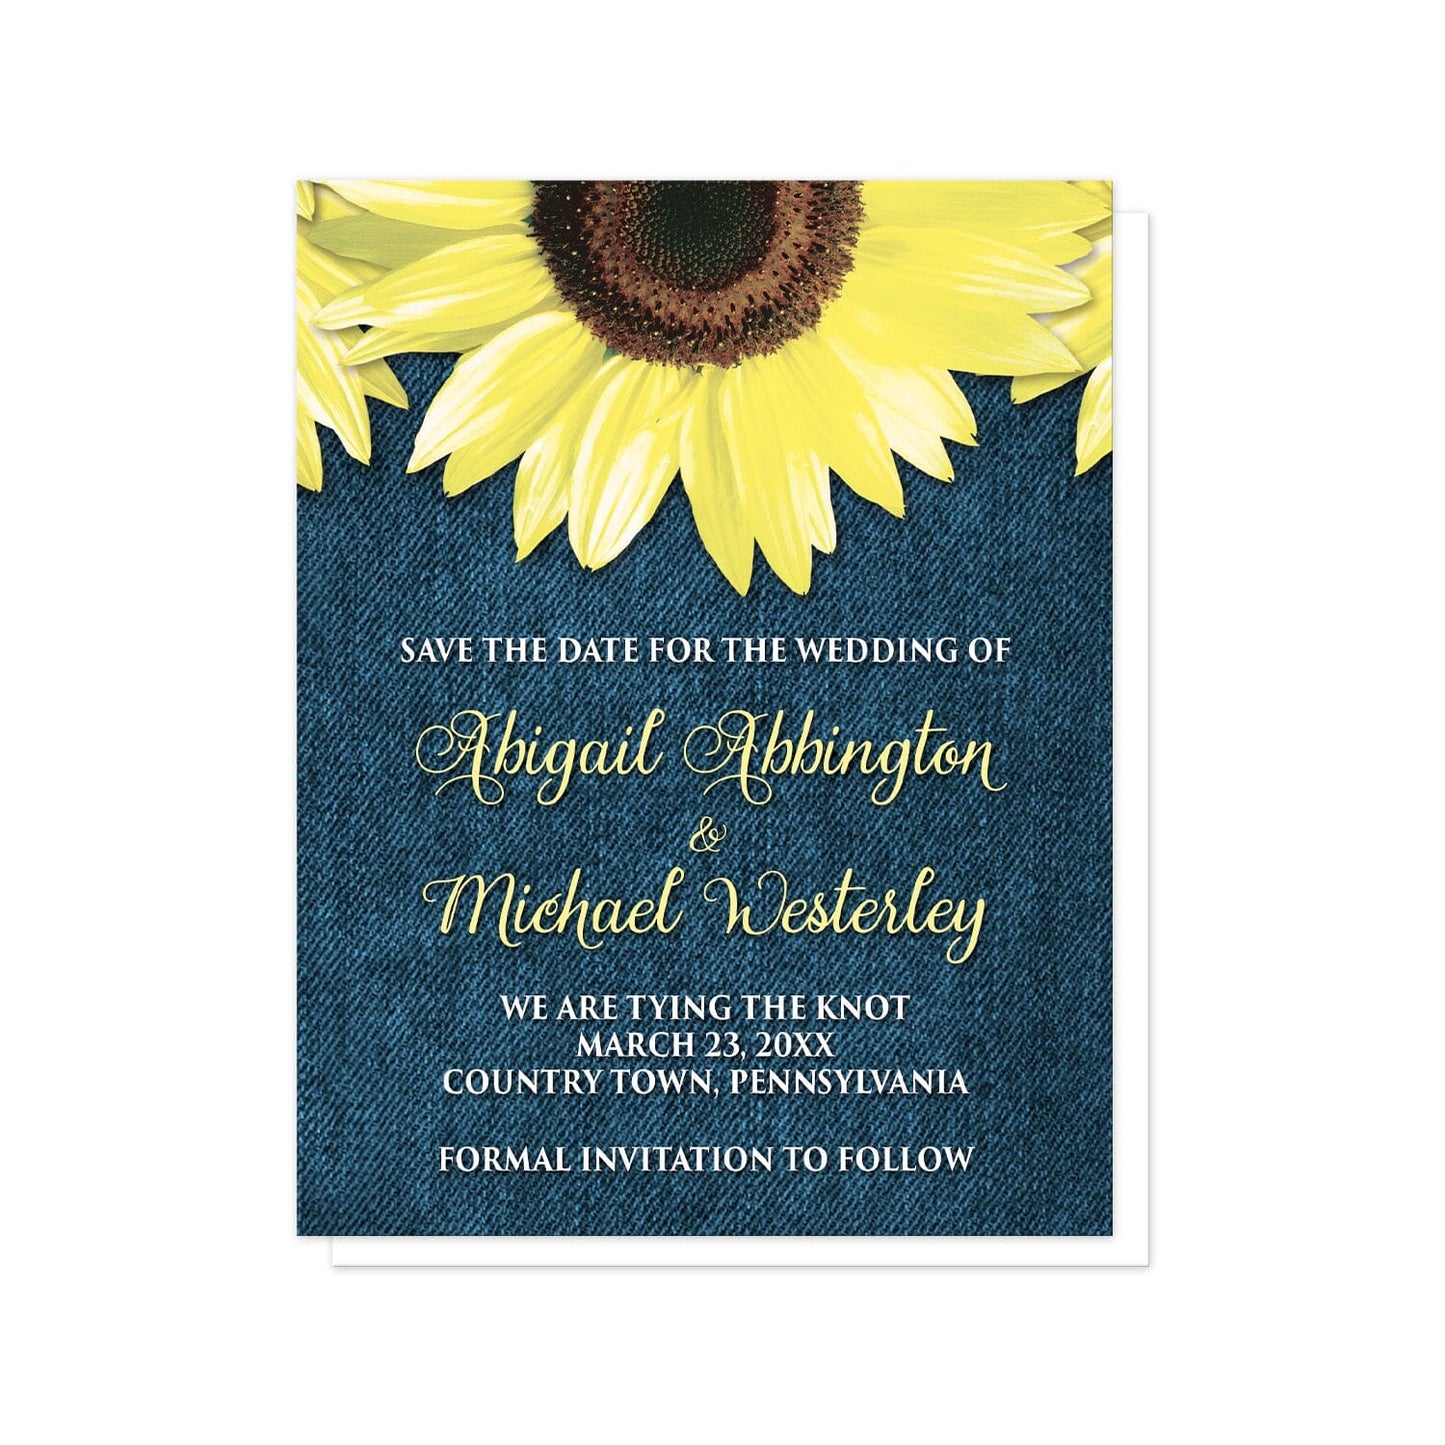 Rustic Sunflower and Denim Save the Date Cards at Artistically Invited. Southern-inspired rustic sunflower and denim save the date cards designed with large yellow sunflowers along the top over a country blue denim design. Your personalized wedding date details are custom printed in yellow and white over the blue denim background below the pretty sunflowers. 